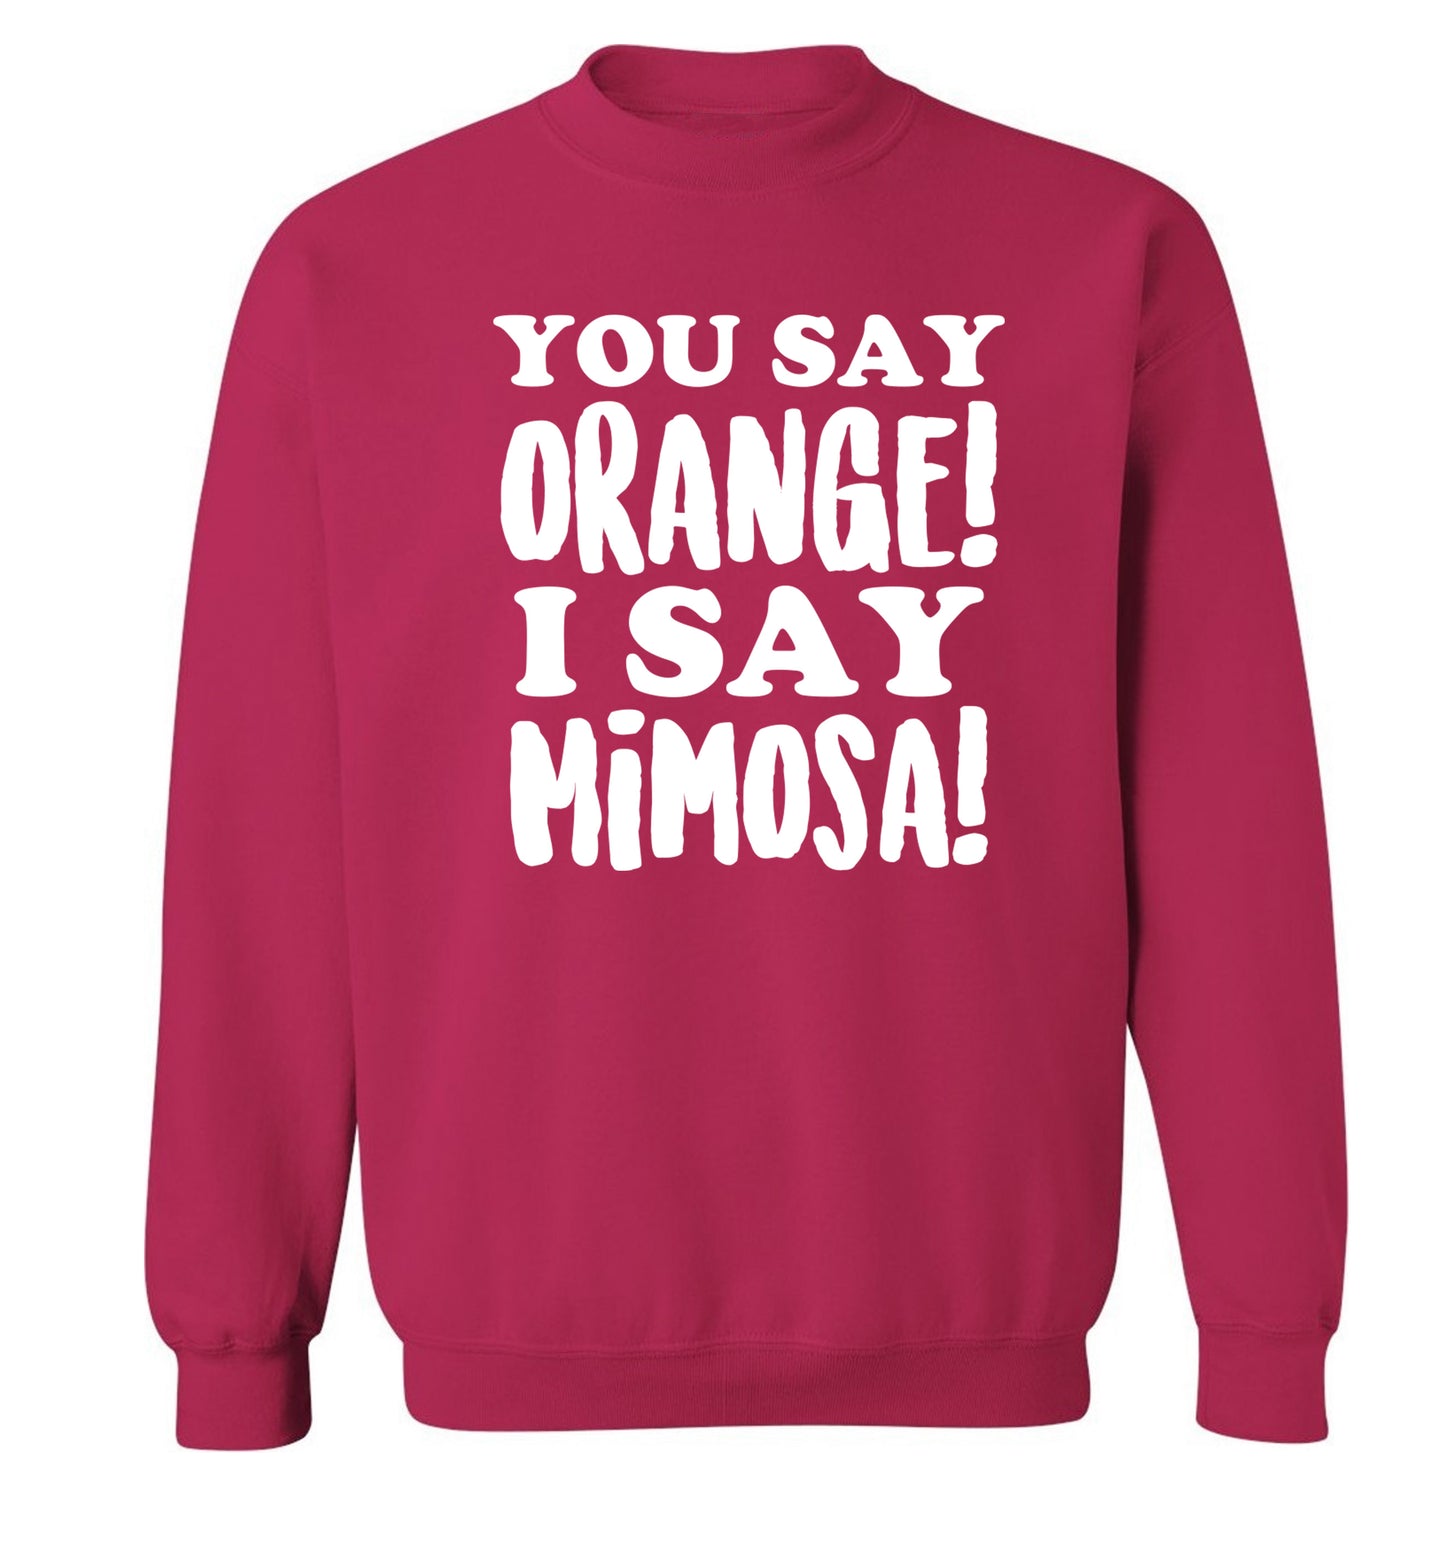 You say orange I say mimosa! Adult's unisex pink Sweater 2XL